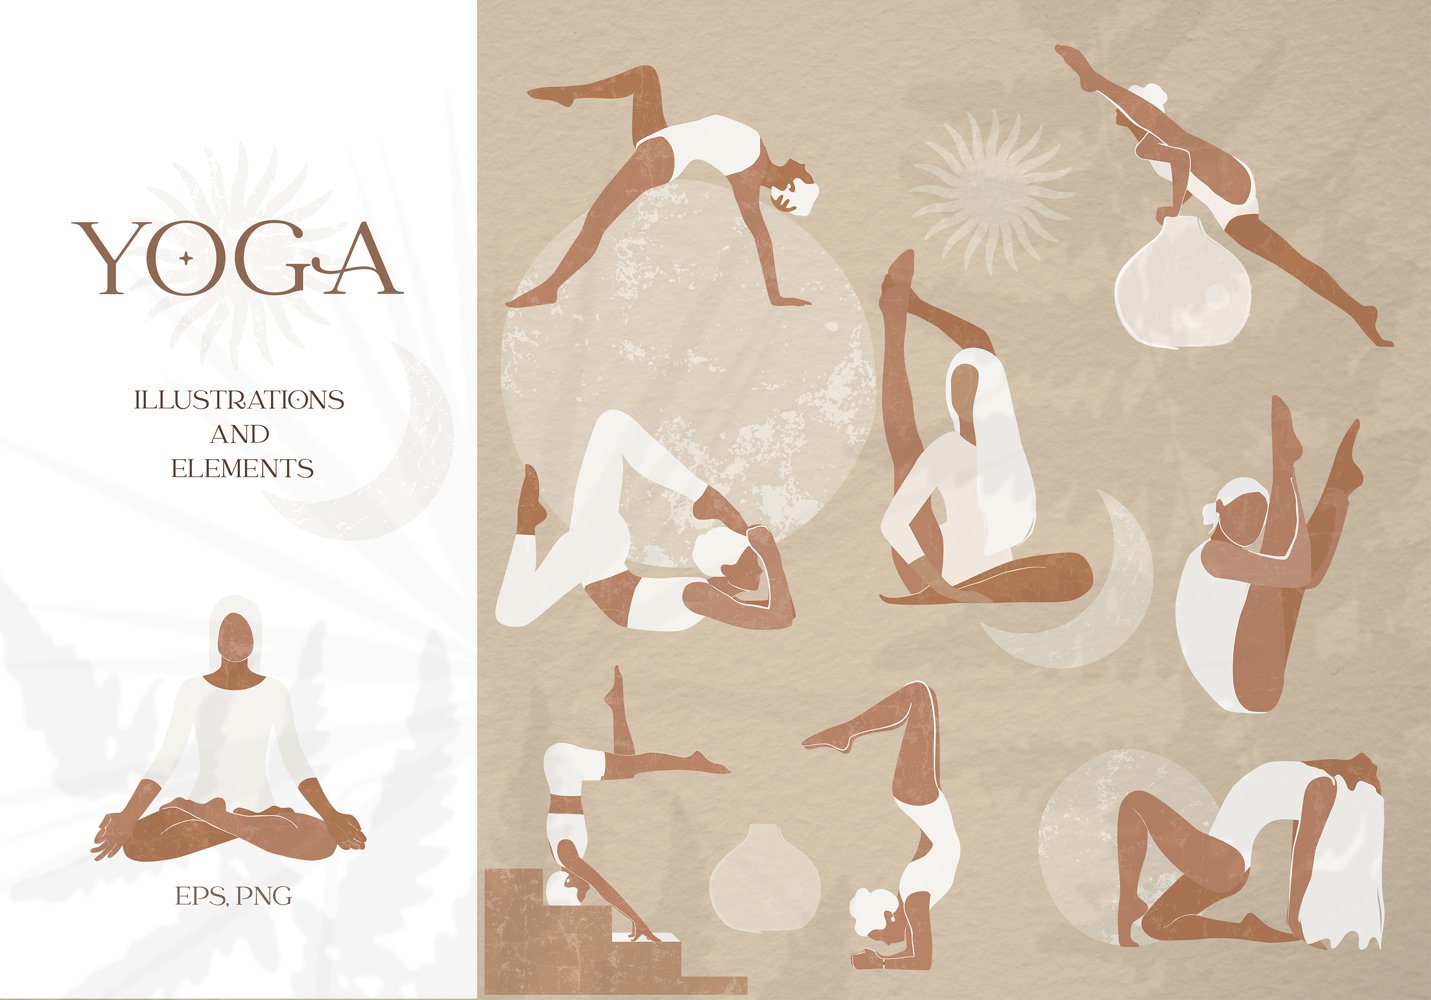 Visualize your yoga themed ideas.